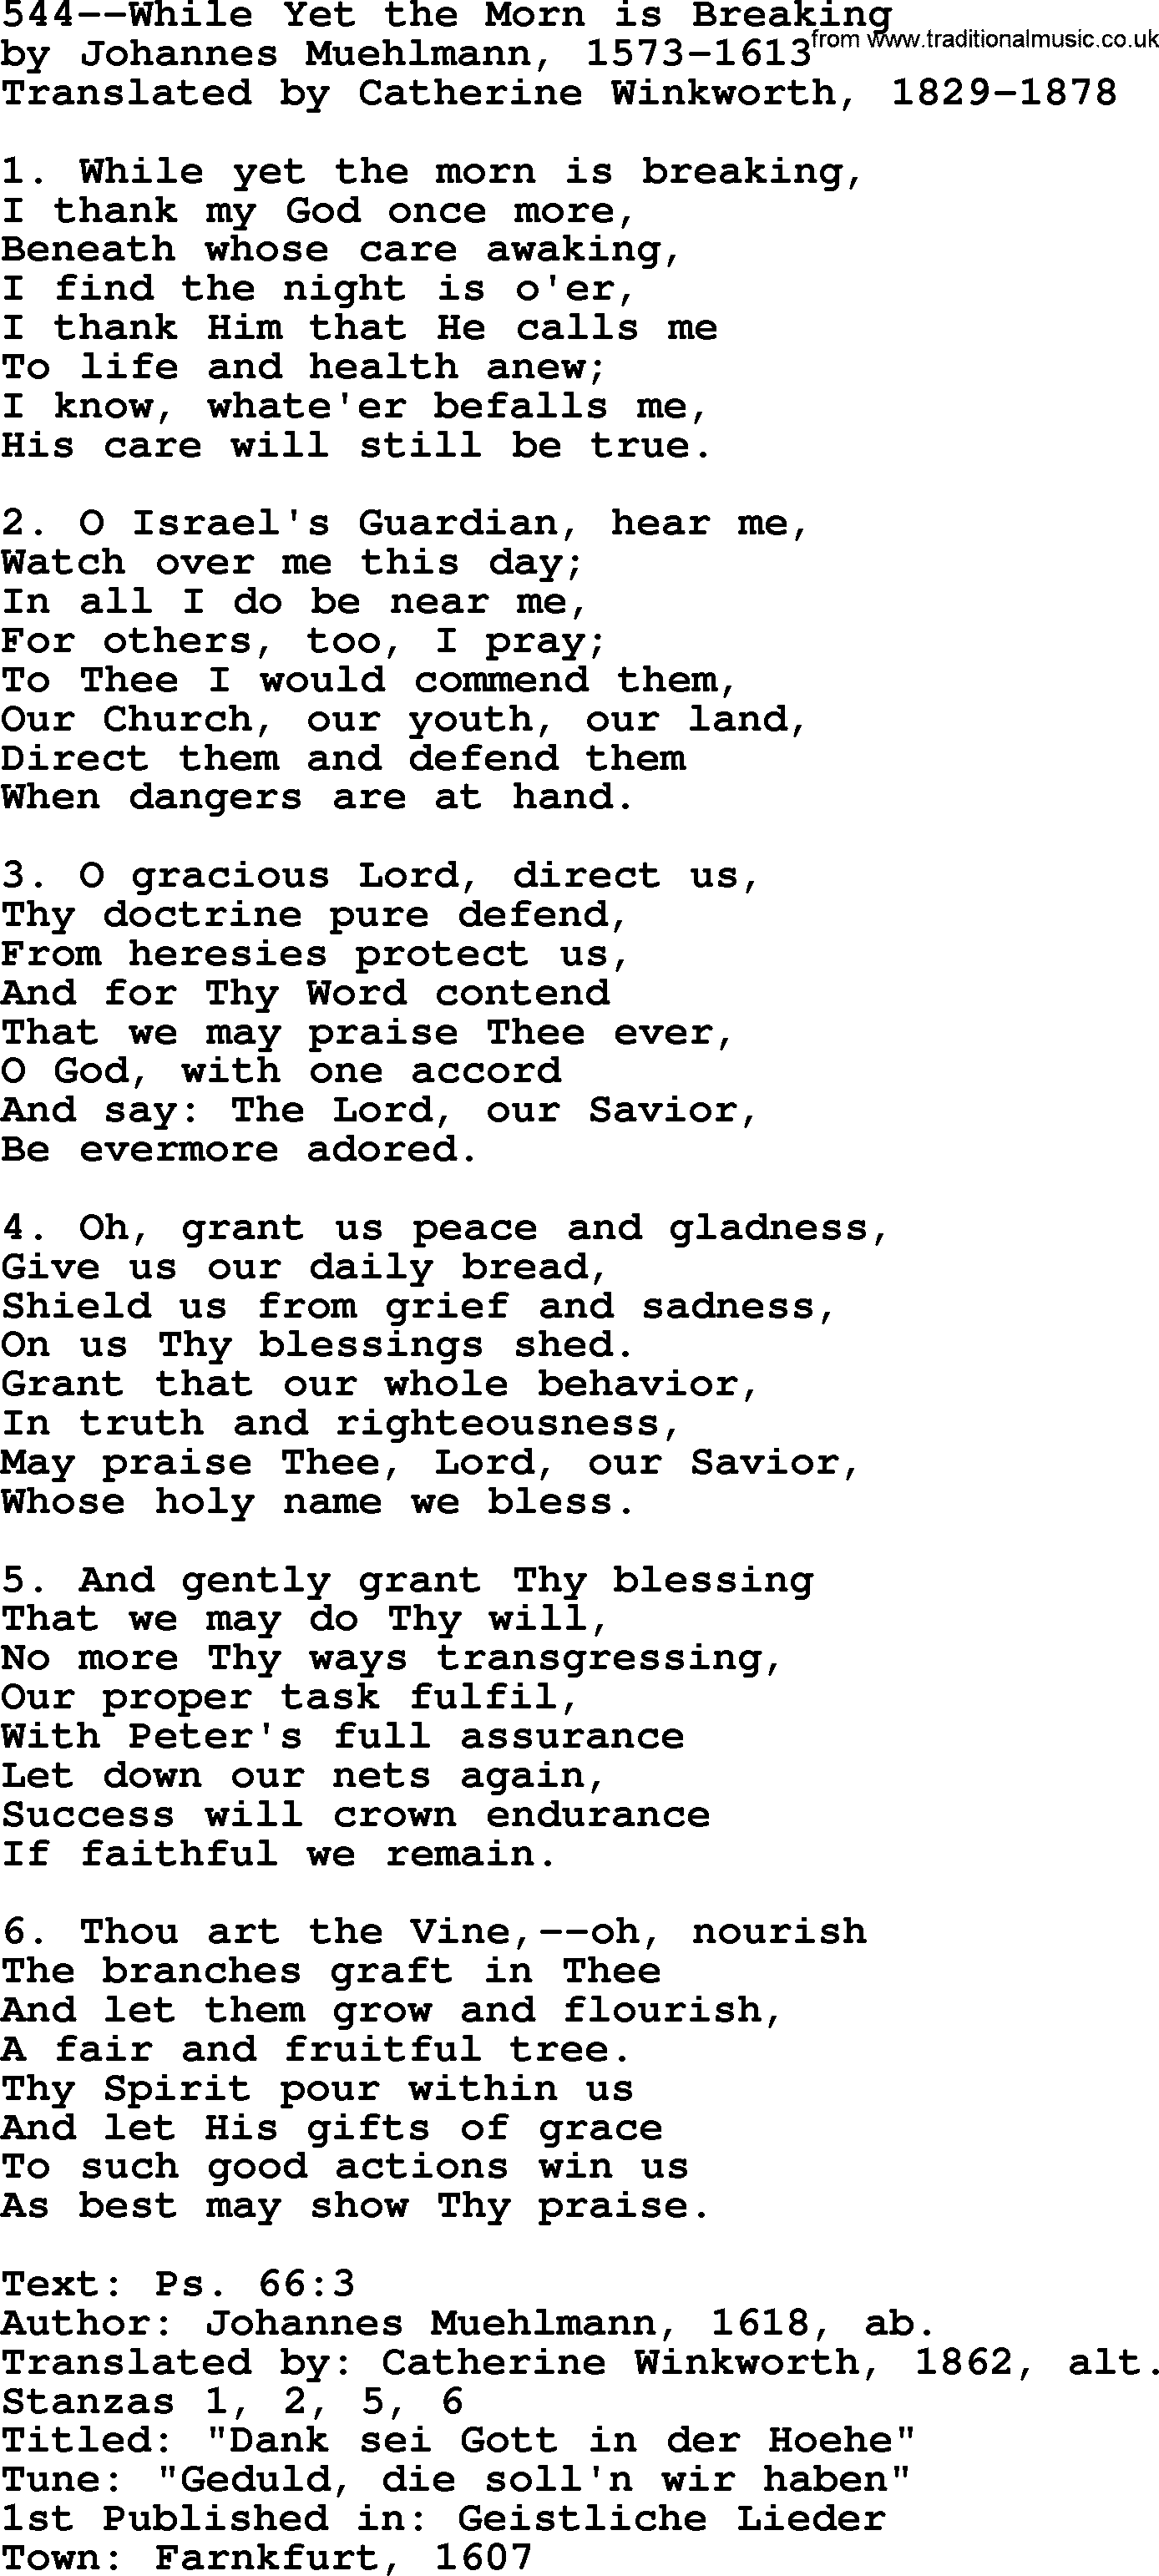 Lutheran Hymn: 544--While Yet the Morn is Breaking.txt lyrics with PDF